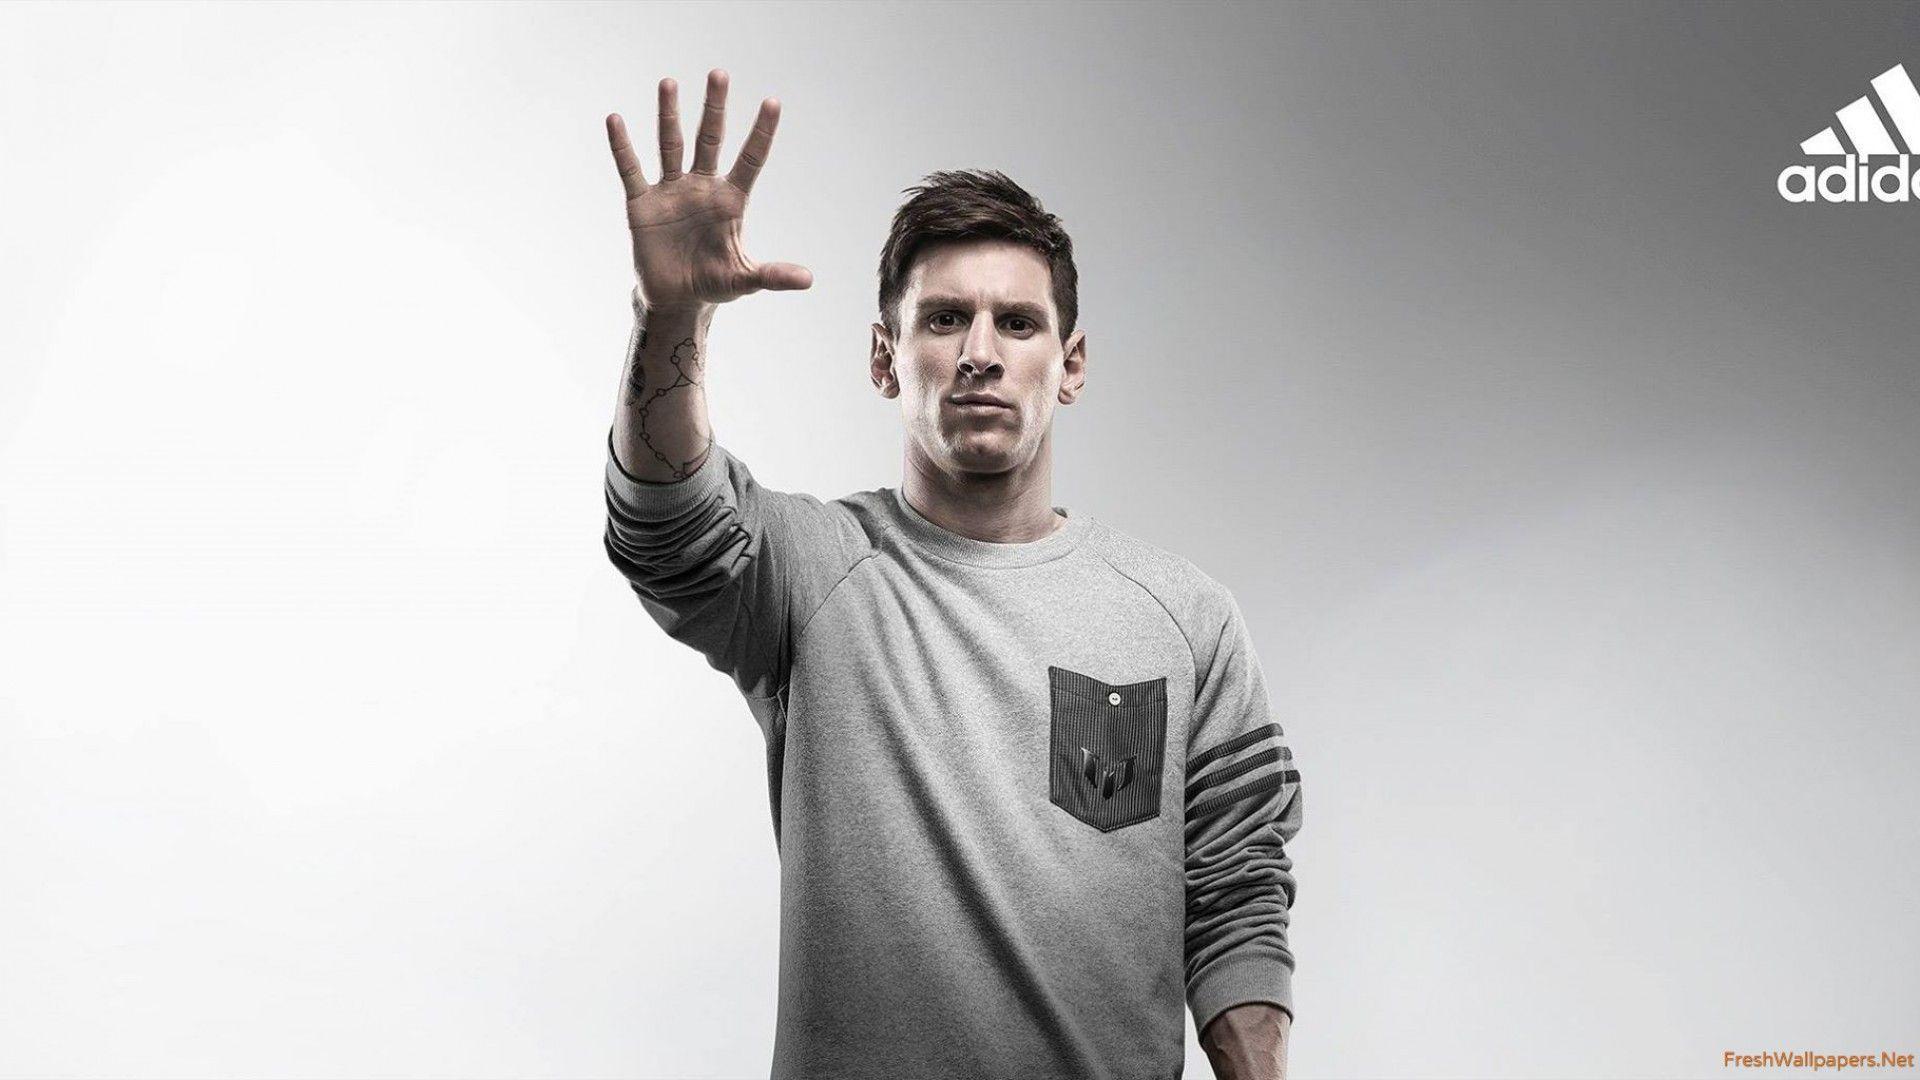 Lionel Messi 2016 Wallpapers HD 1080p